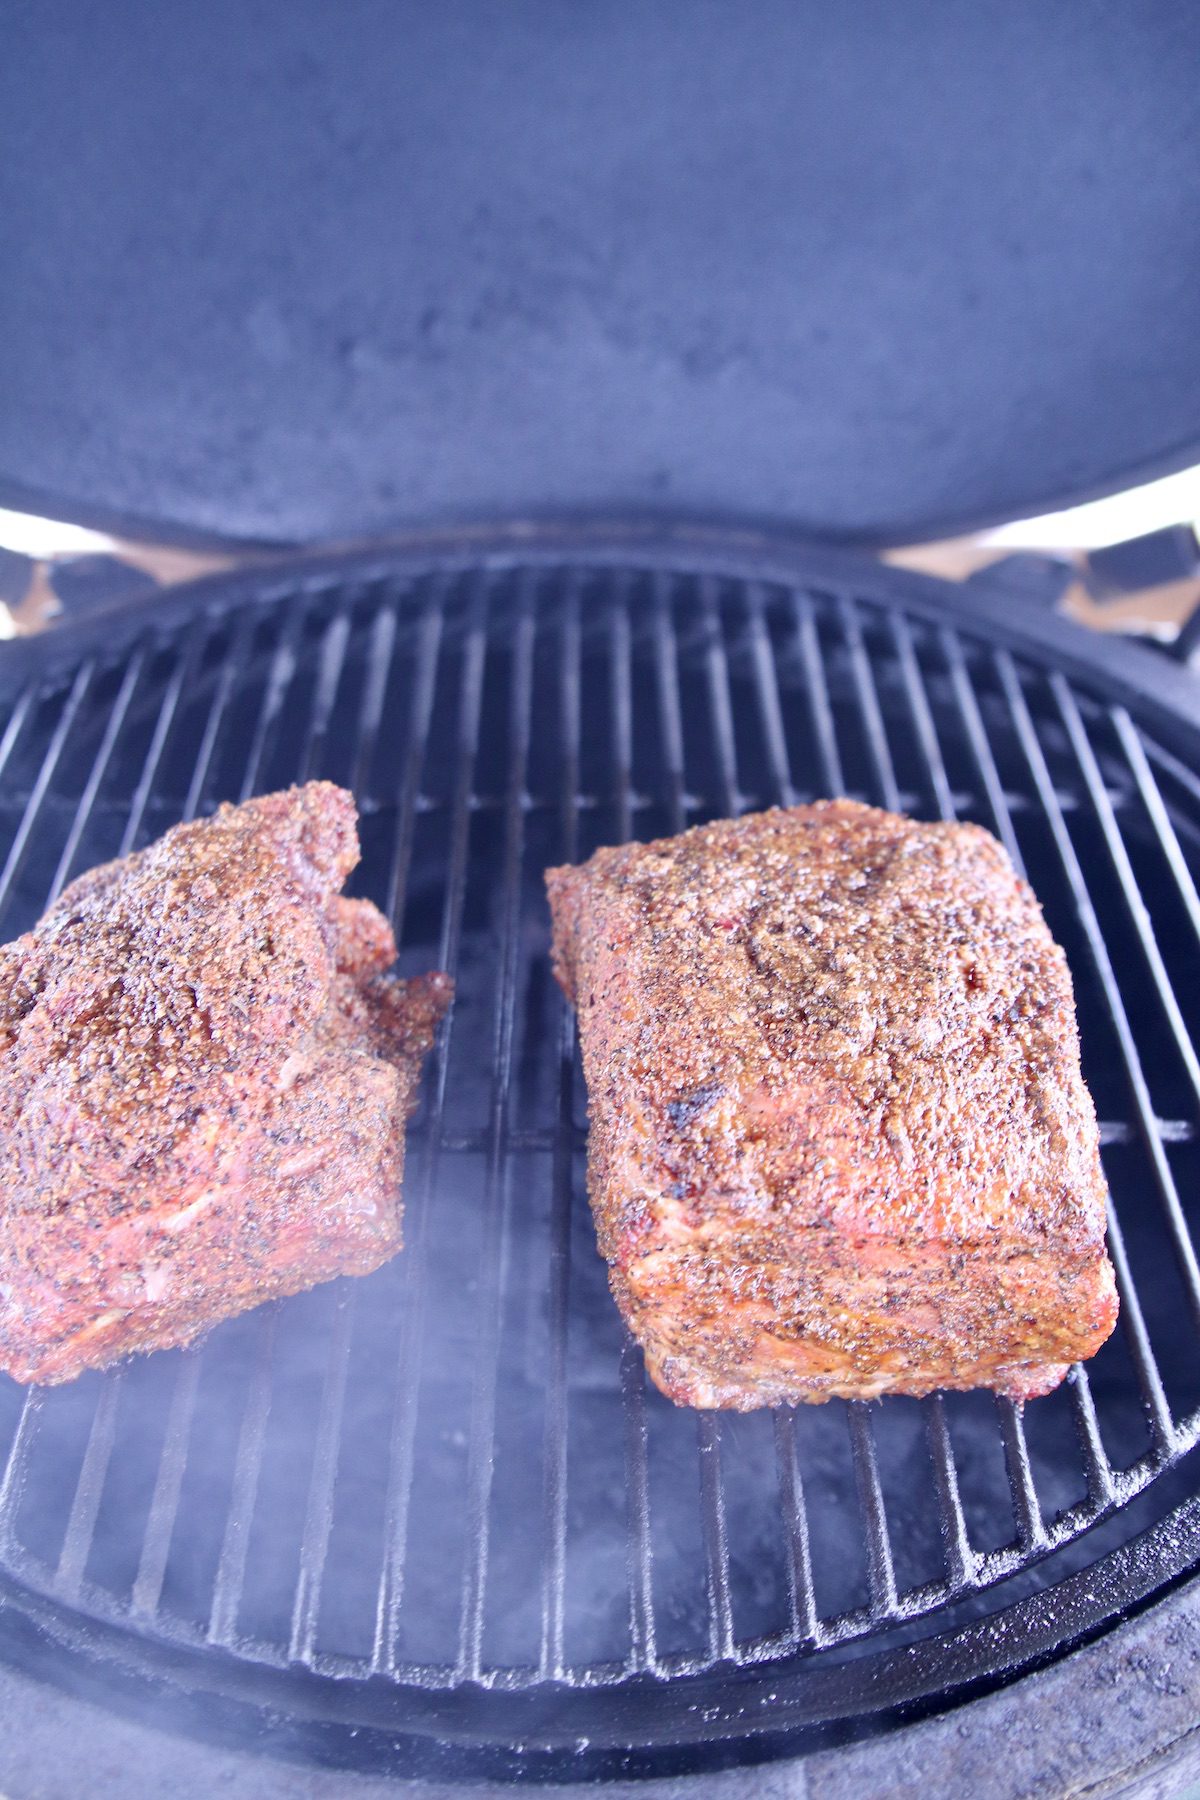 2 pork shoulders on a grill with dry rub seasoning